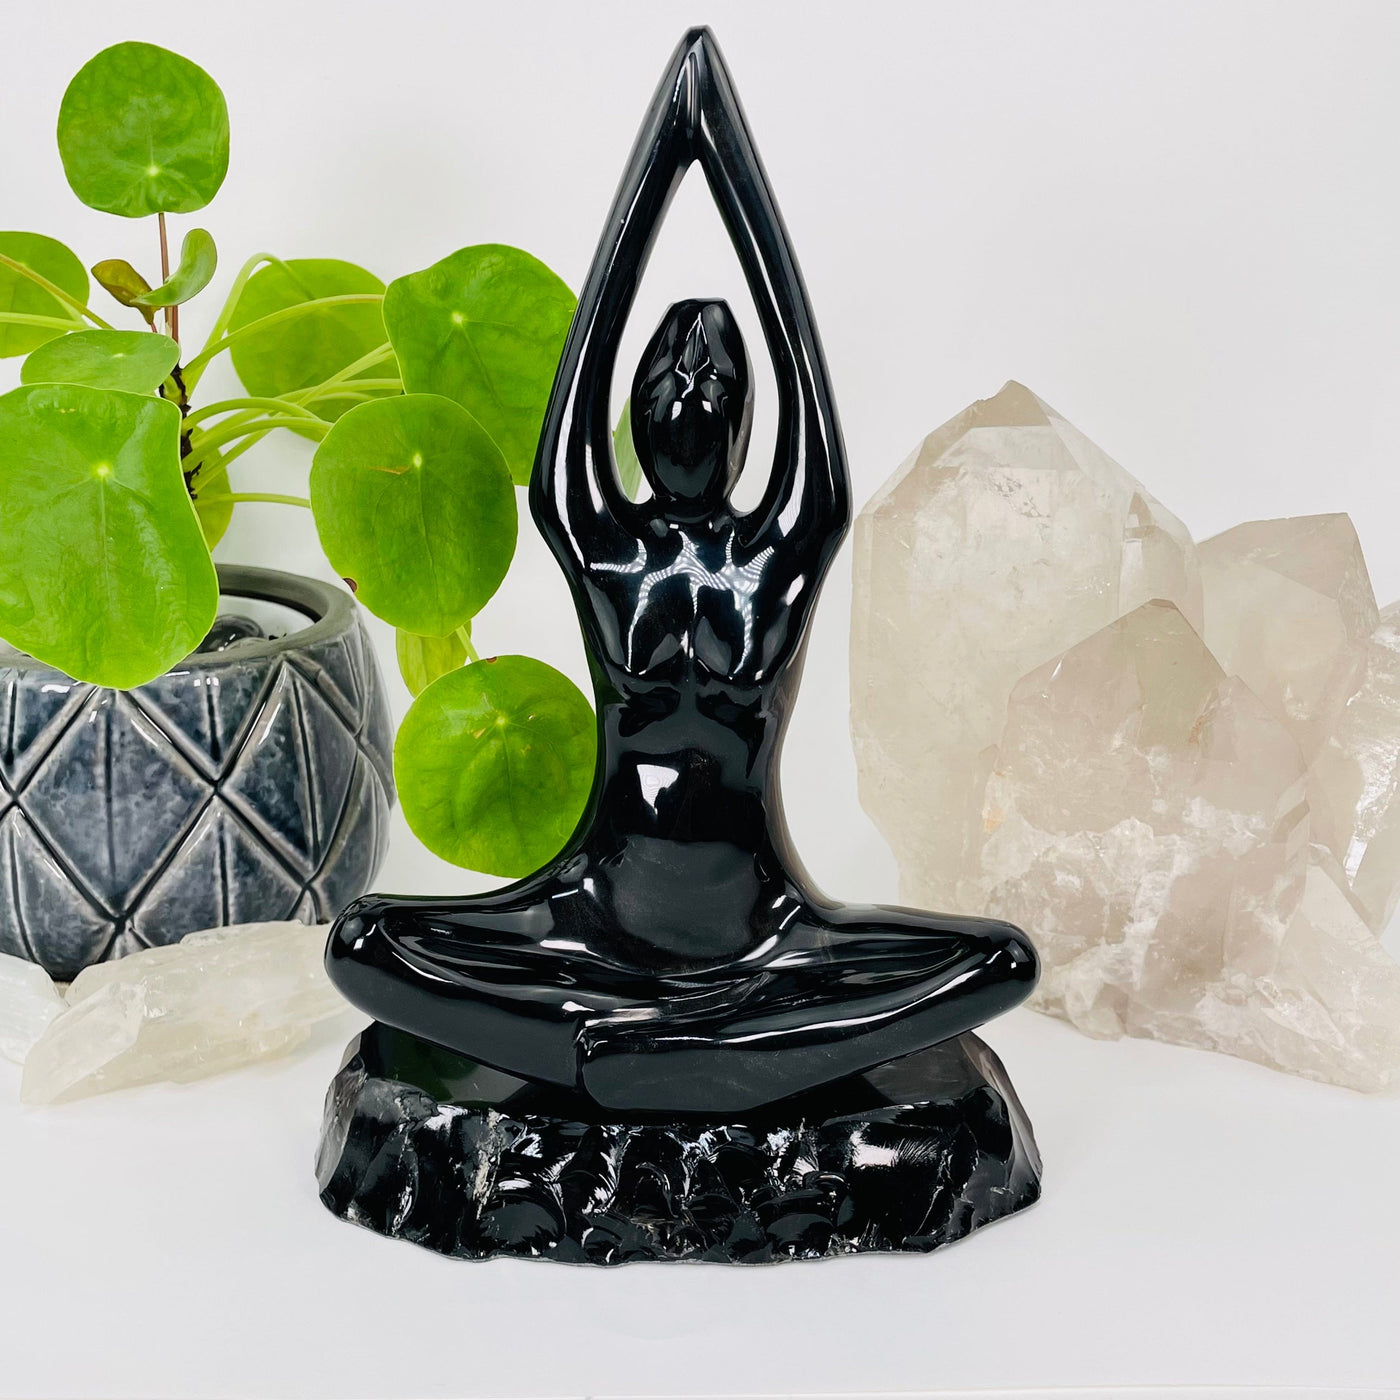 gold sheen obsidian carved into a meditating goddess displayed as home decor